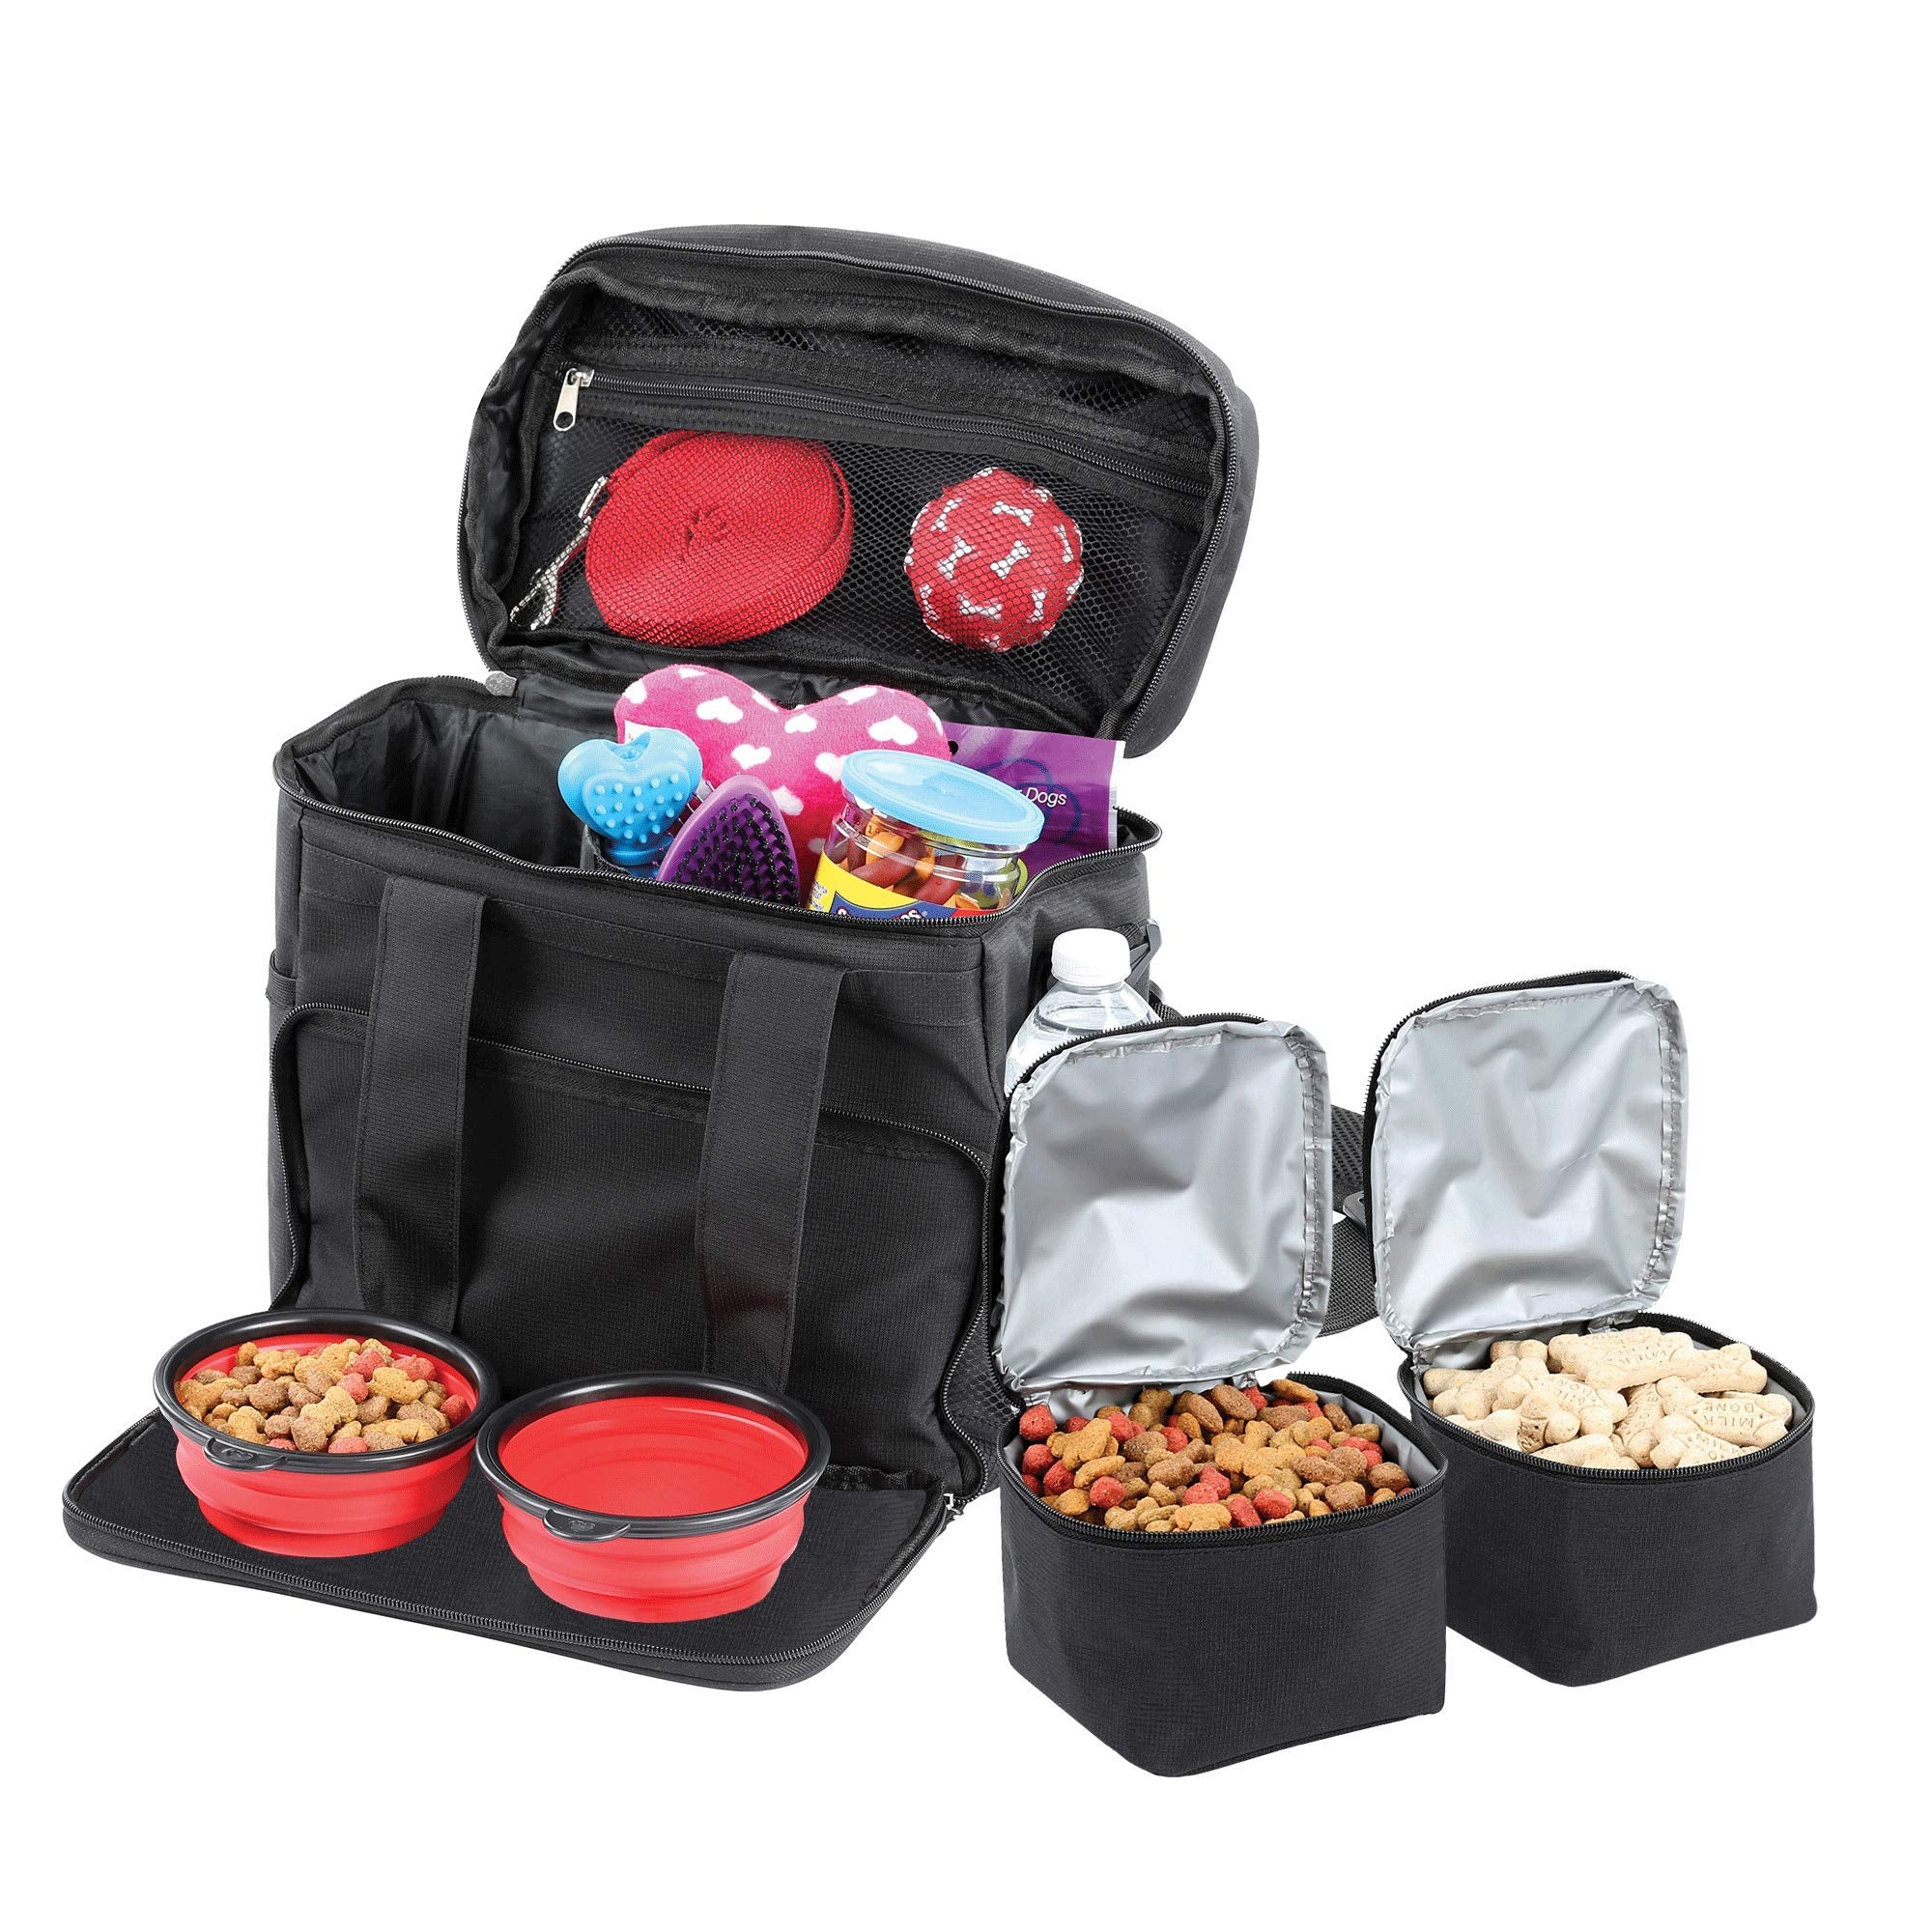 Bundaloo Dog Travel Bag Accessories Supplies Organizer 5-Piece Set with Shoulder Strap | 2 Lined Pet Food Containers, 2 Collapsible Feeding Bowls. Everyday Dogs Essentials